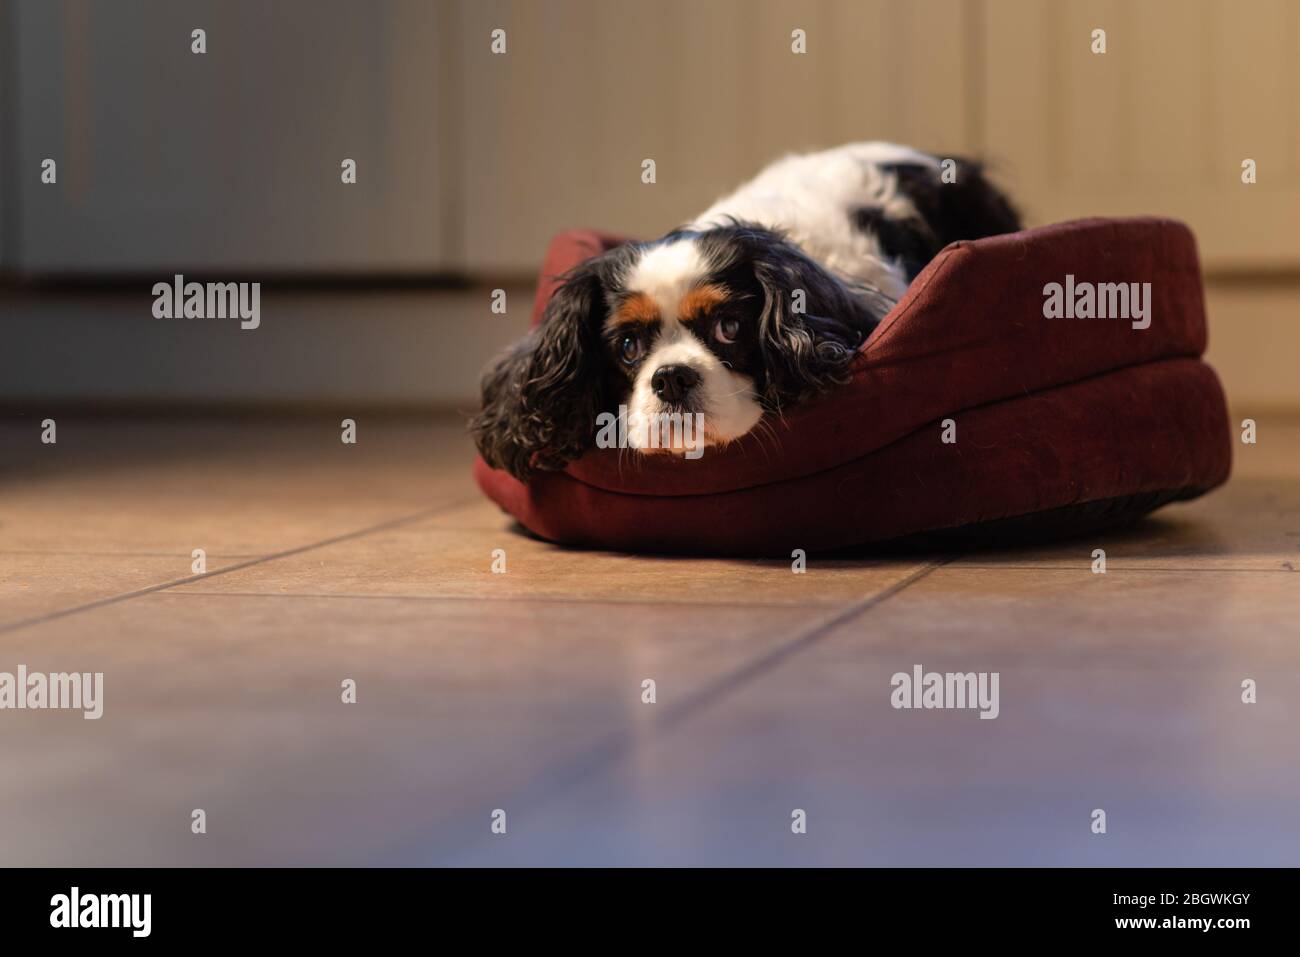 Cavalier King Charles dog in dog bed ix. December, 2018 Stock Photo